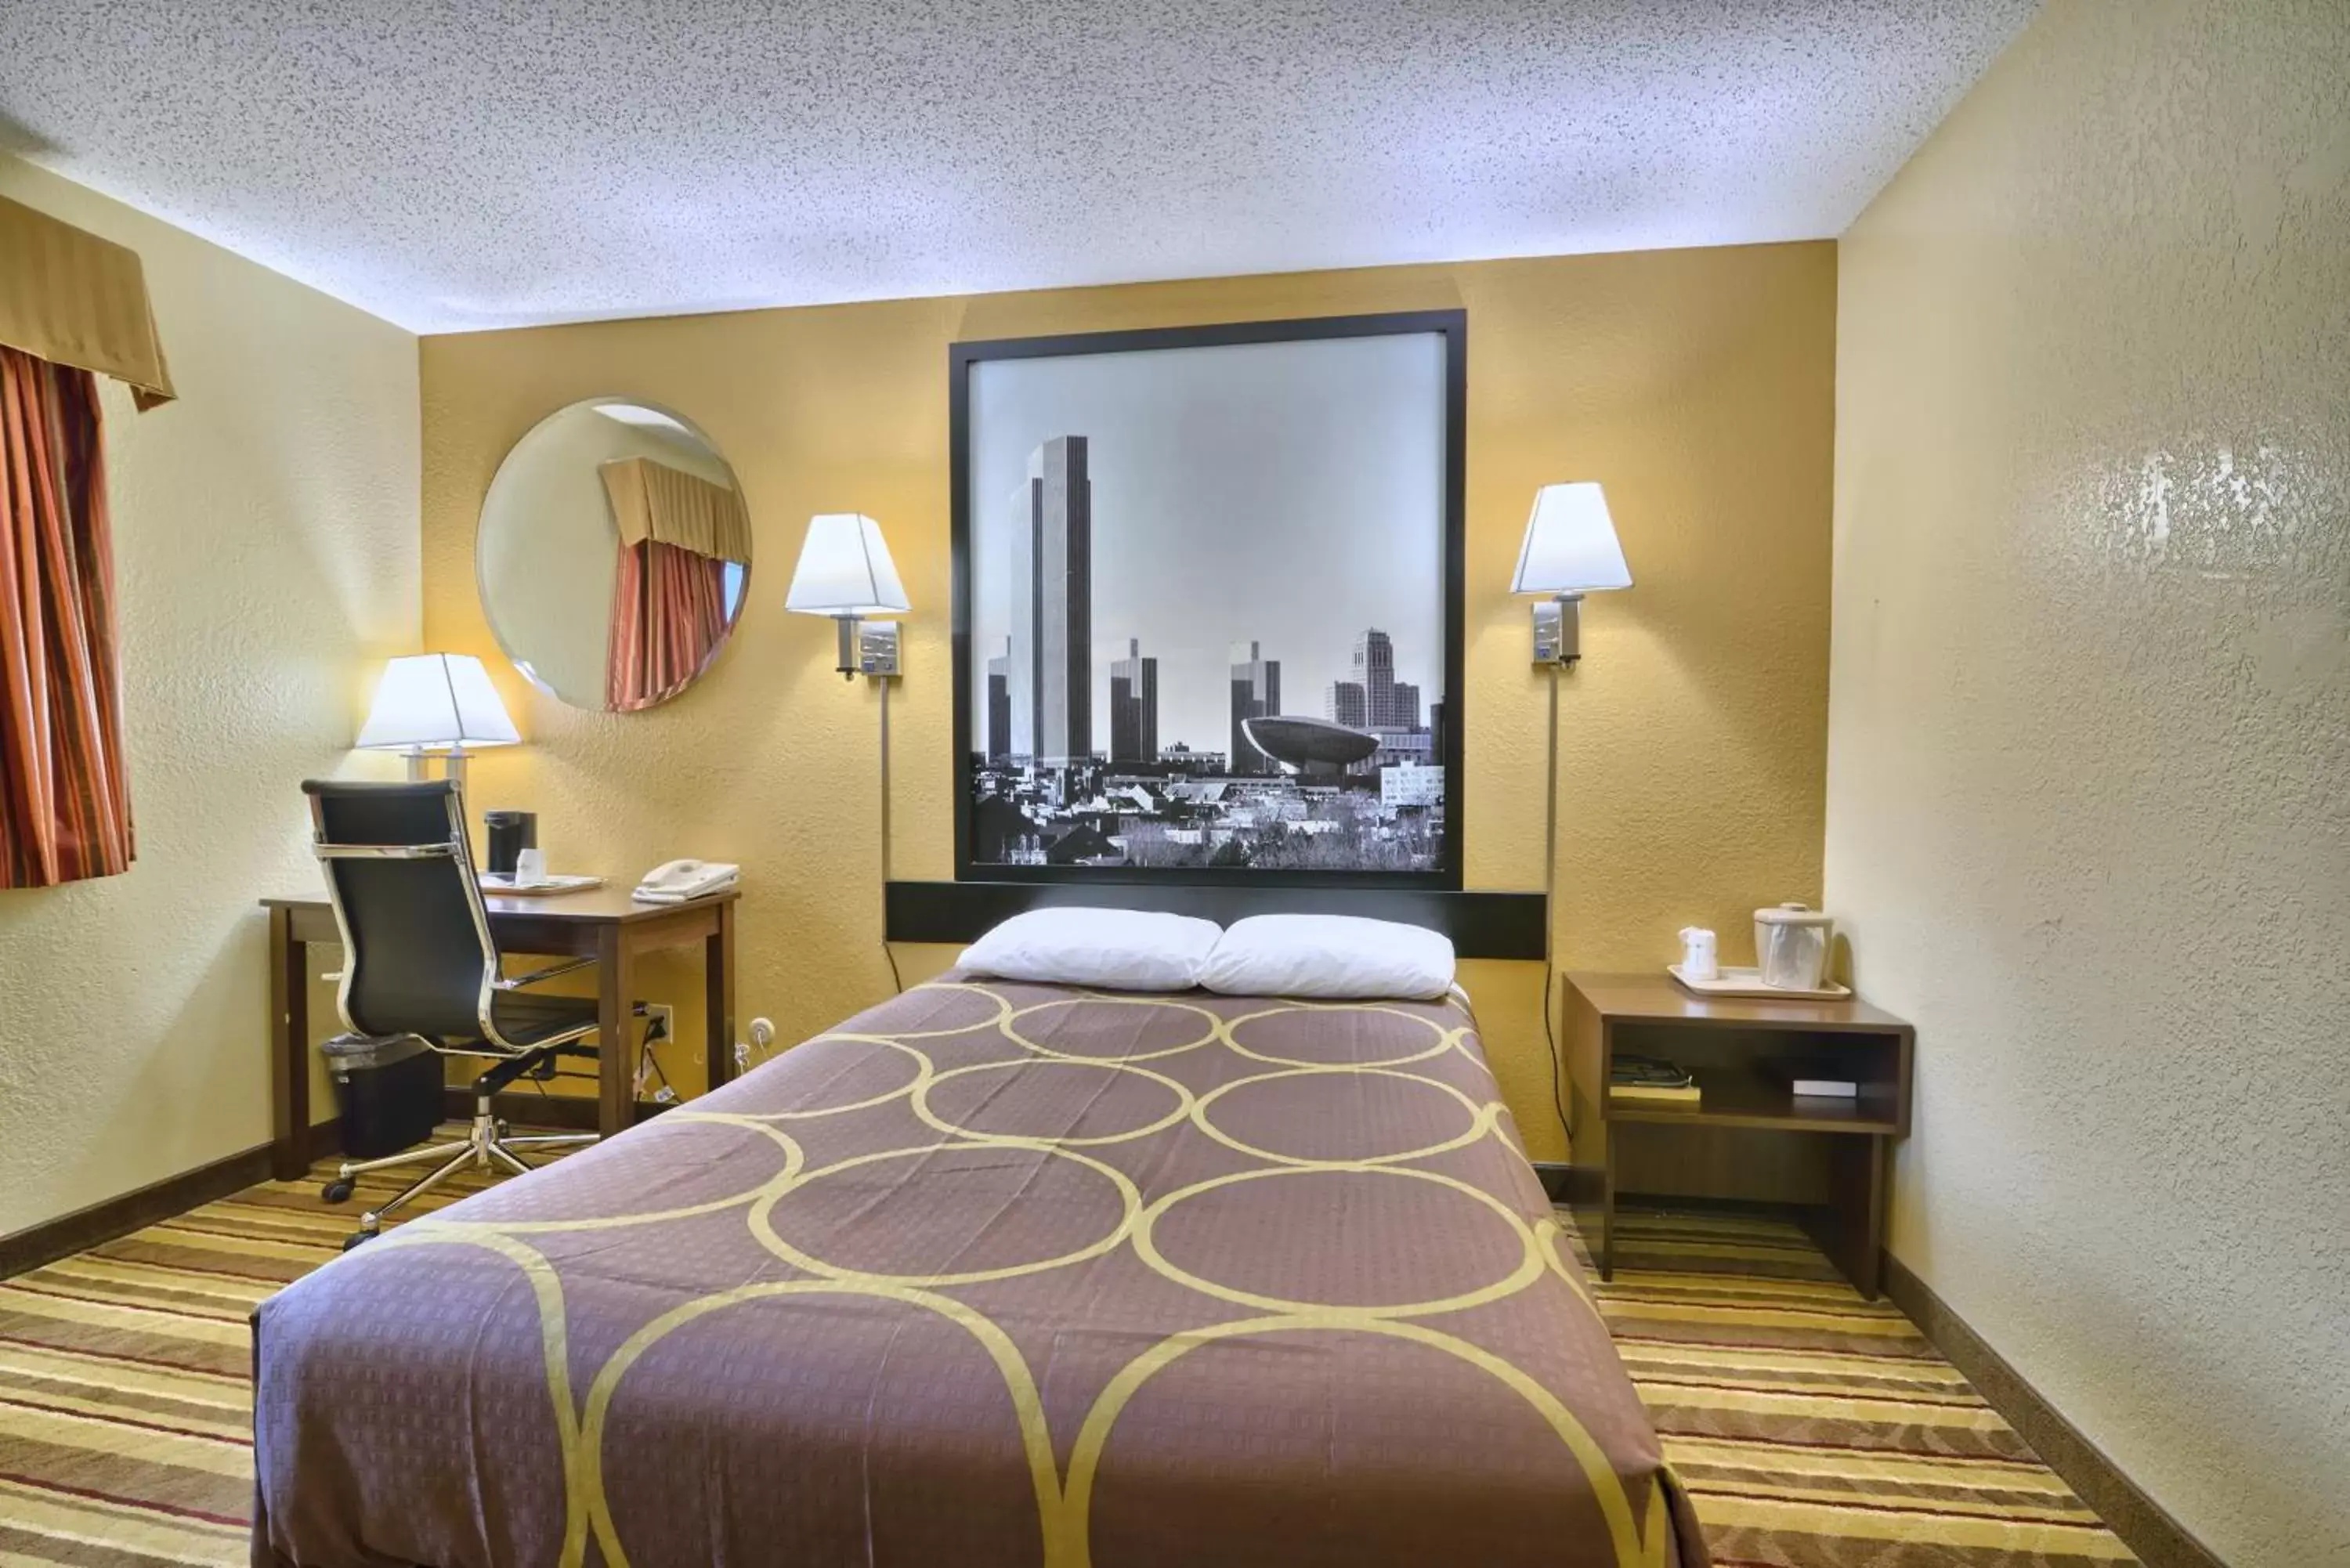 Bedroom, Room Photo in Super 8 by Wyndham Latham - Albany Airport